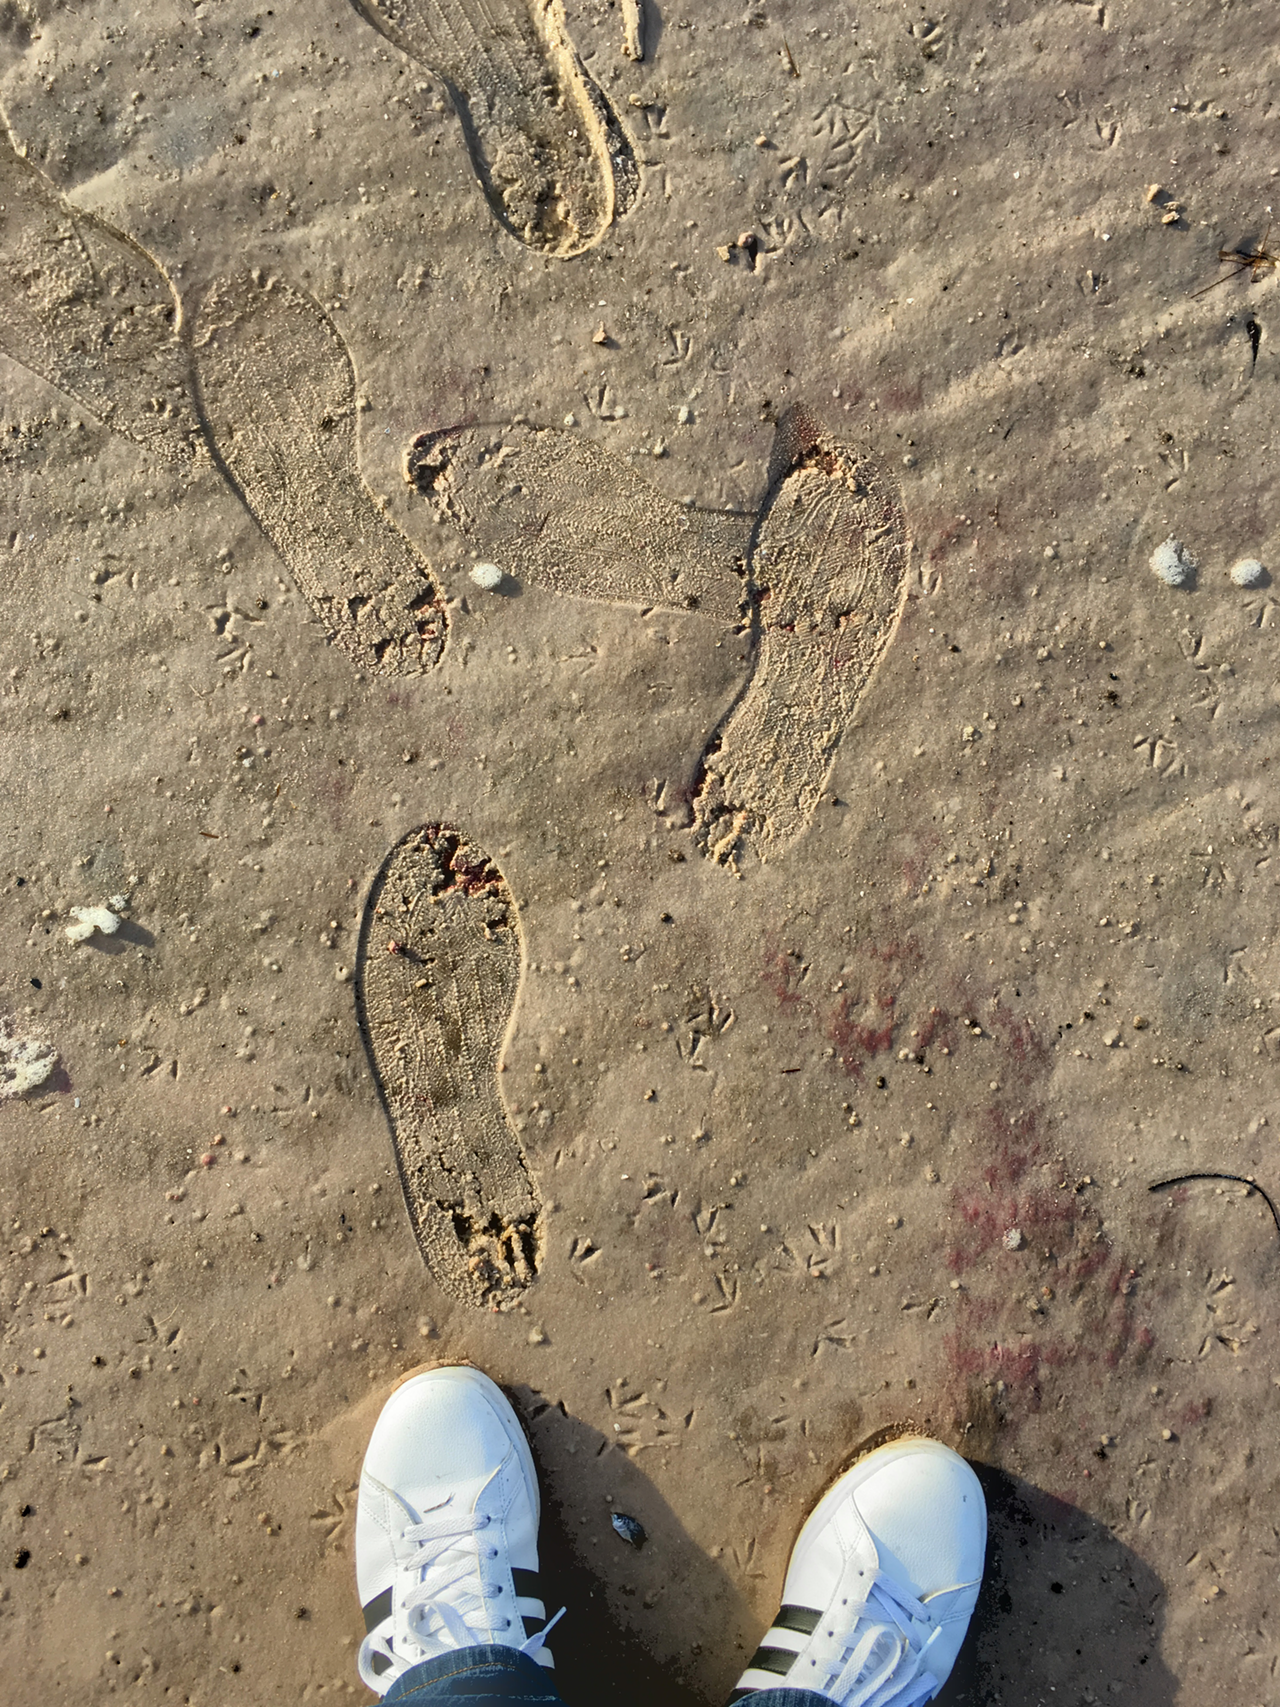 I liked the way the shadows drew attention to the footprints (app: ProCamera VividHDR)